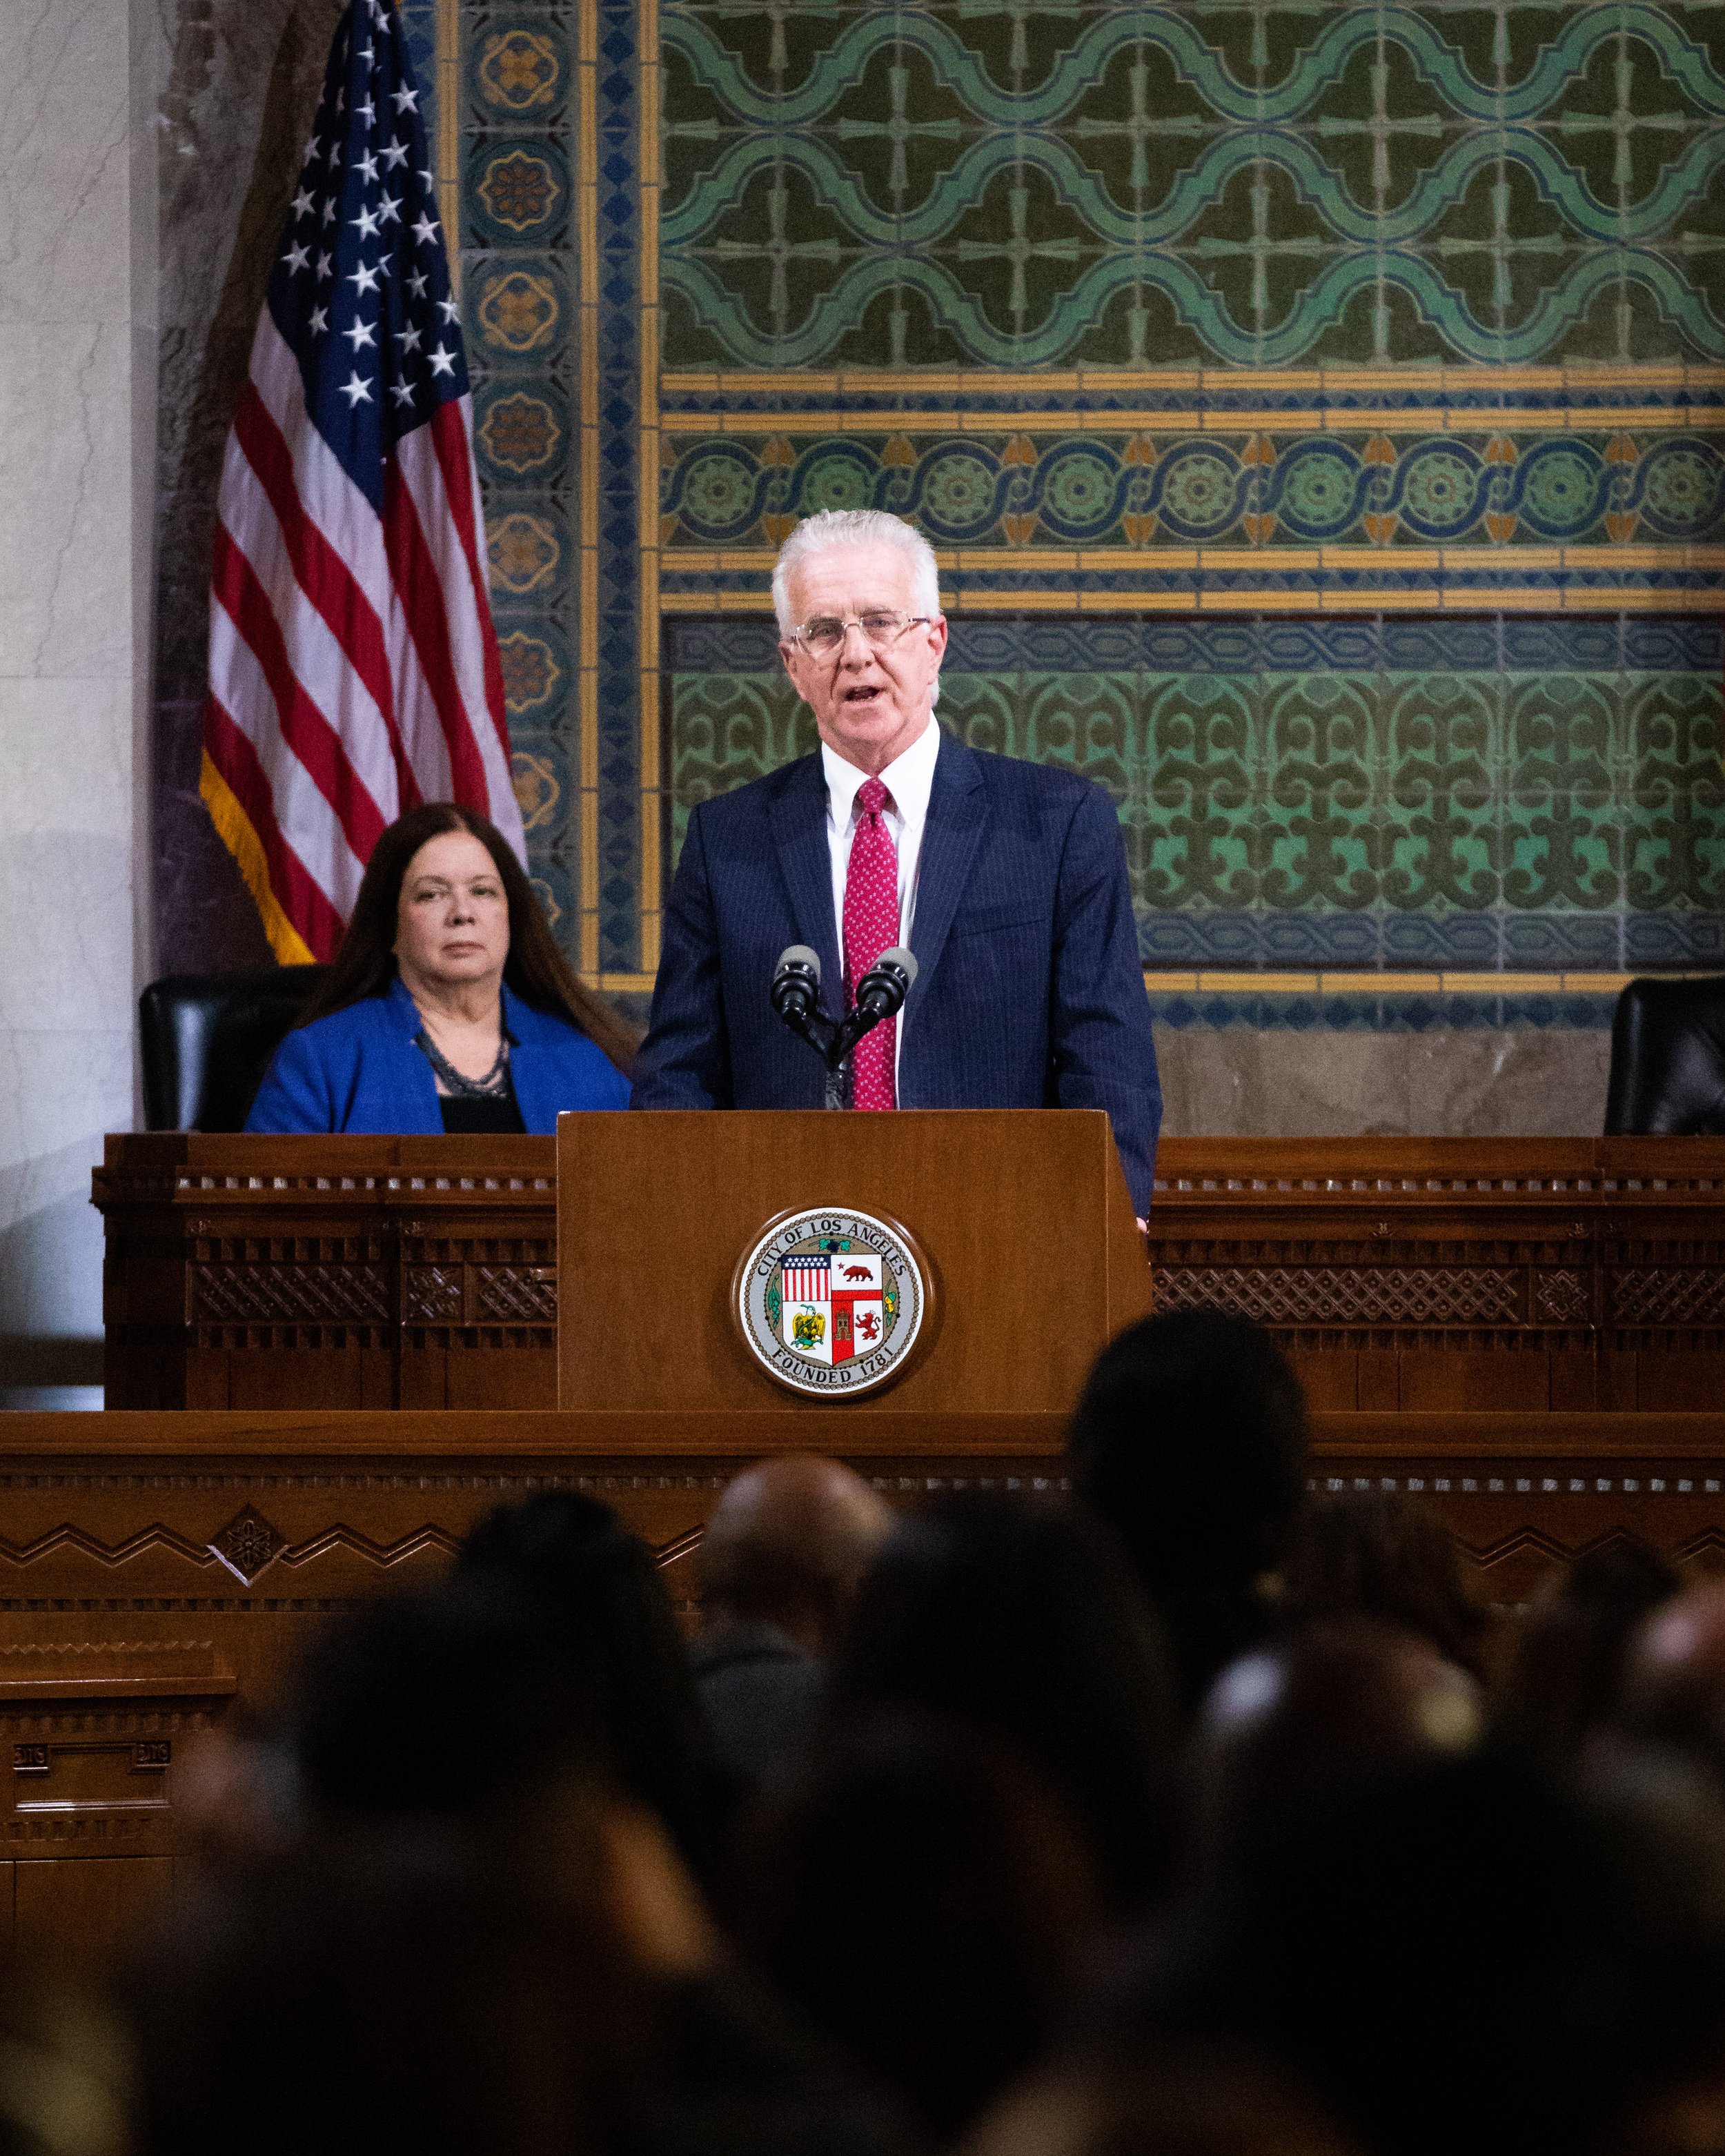  Los Angeles City Council President Paul Krekorian (district 2) speaks before Mayor Karen Bass delivers her first State of the City address in the Council Chambers, in Los Angeles City Hall, Los Angeles, Calif., on Monday, April 17, 2023. As part of 